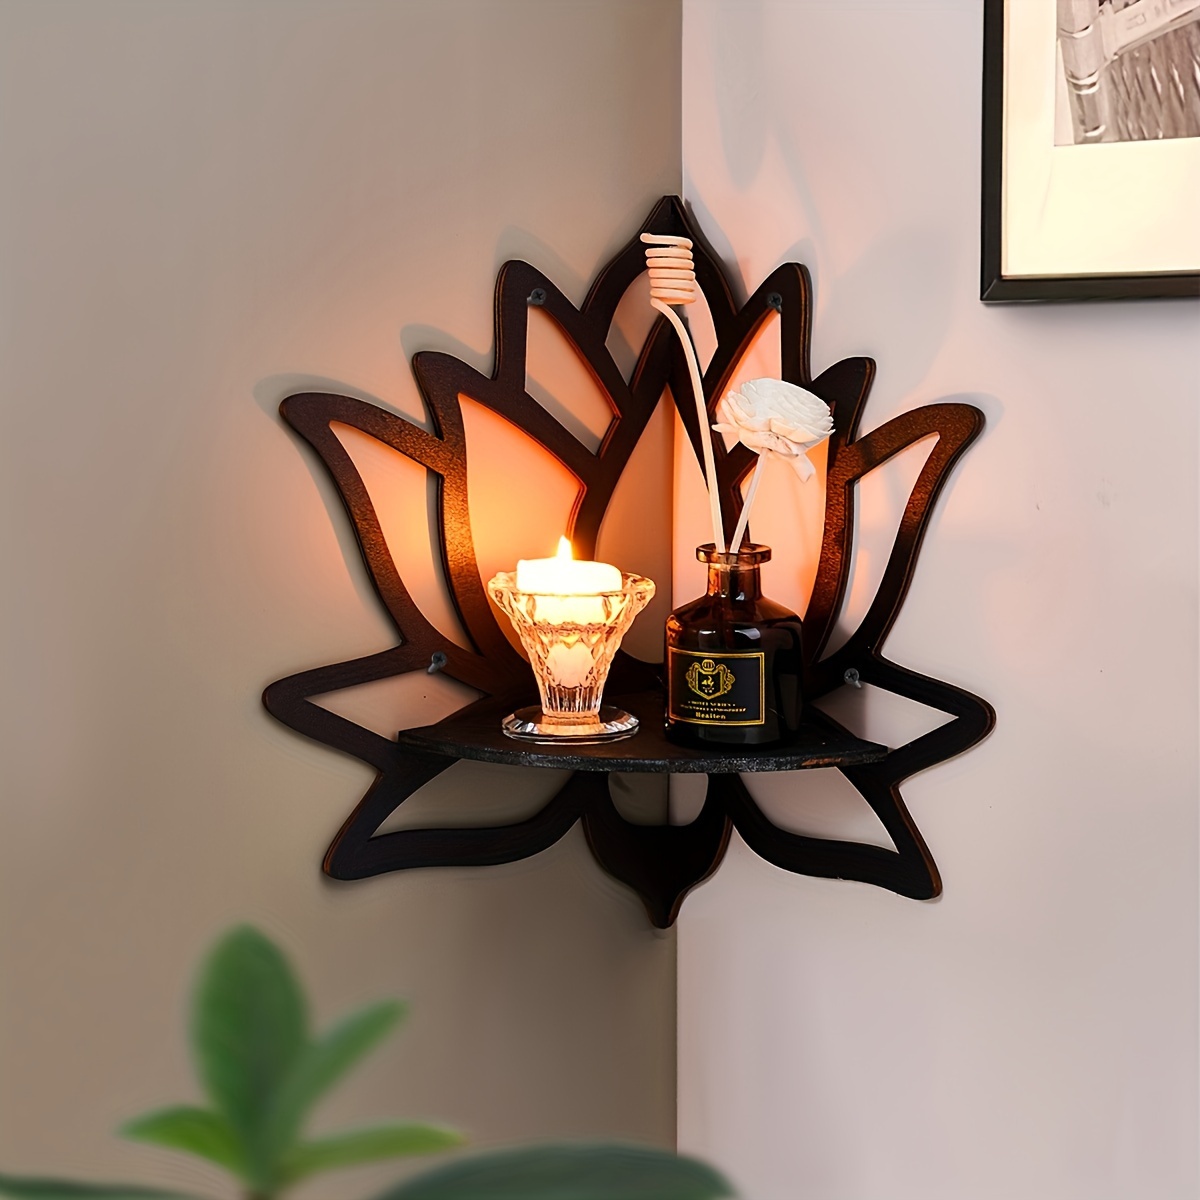 

Classic Lotus-shaped Wall Shelf Decorative Sconce – Manufactured Wood Candle Holder Wall Accent For Home Decor – Corner Hanging Ornament Display – No Electricity Or Feathers – 1 Piece General Fit